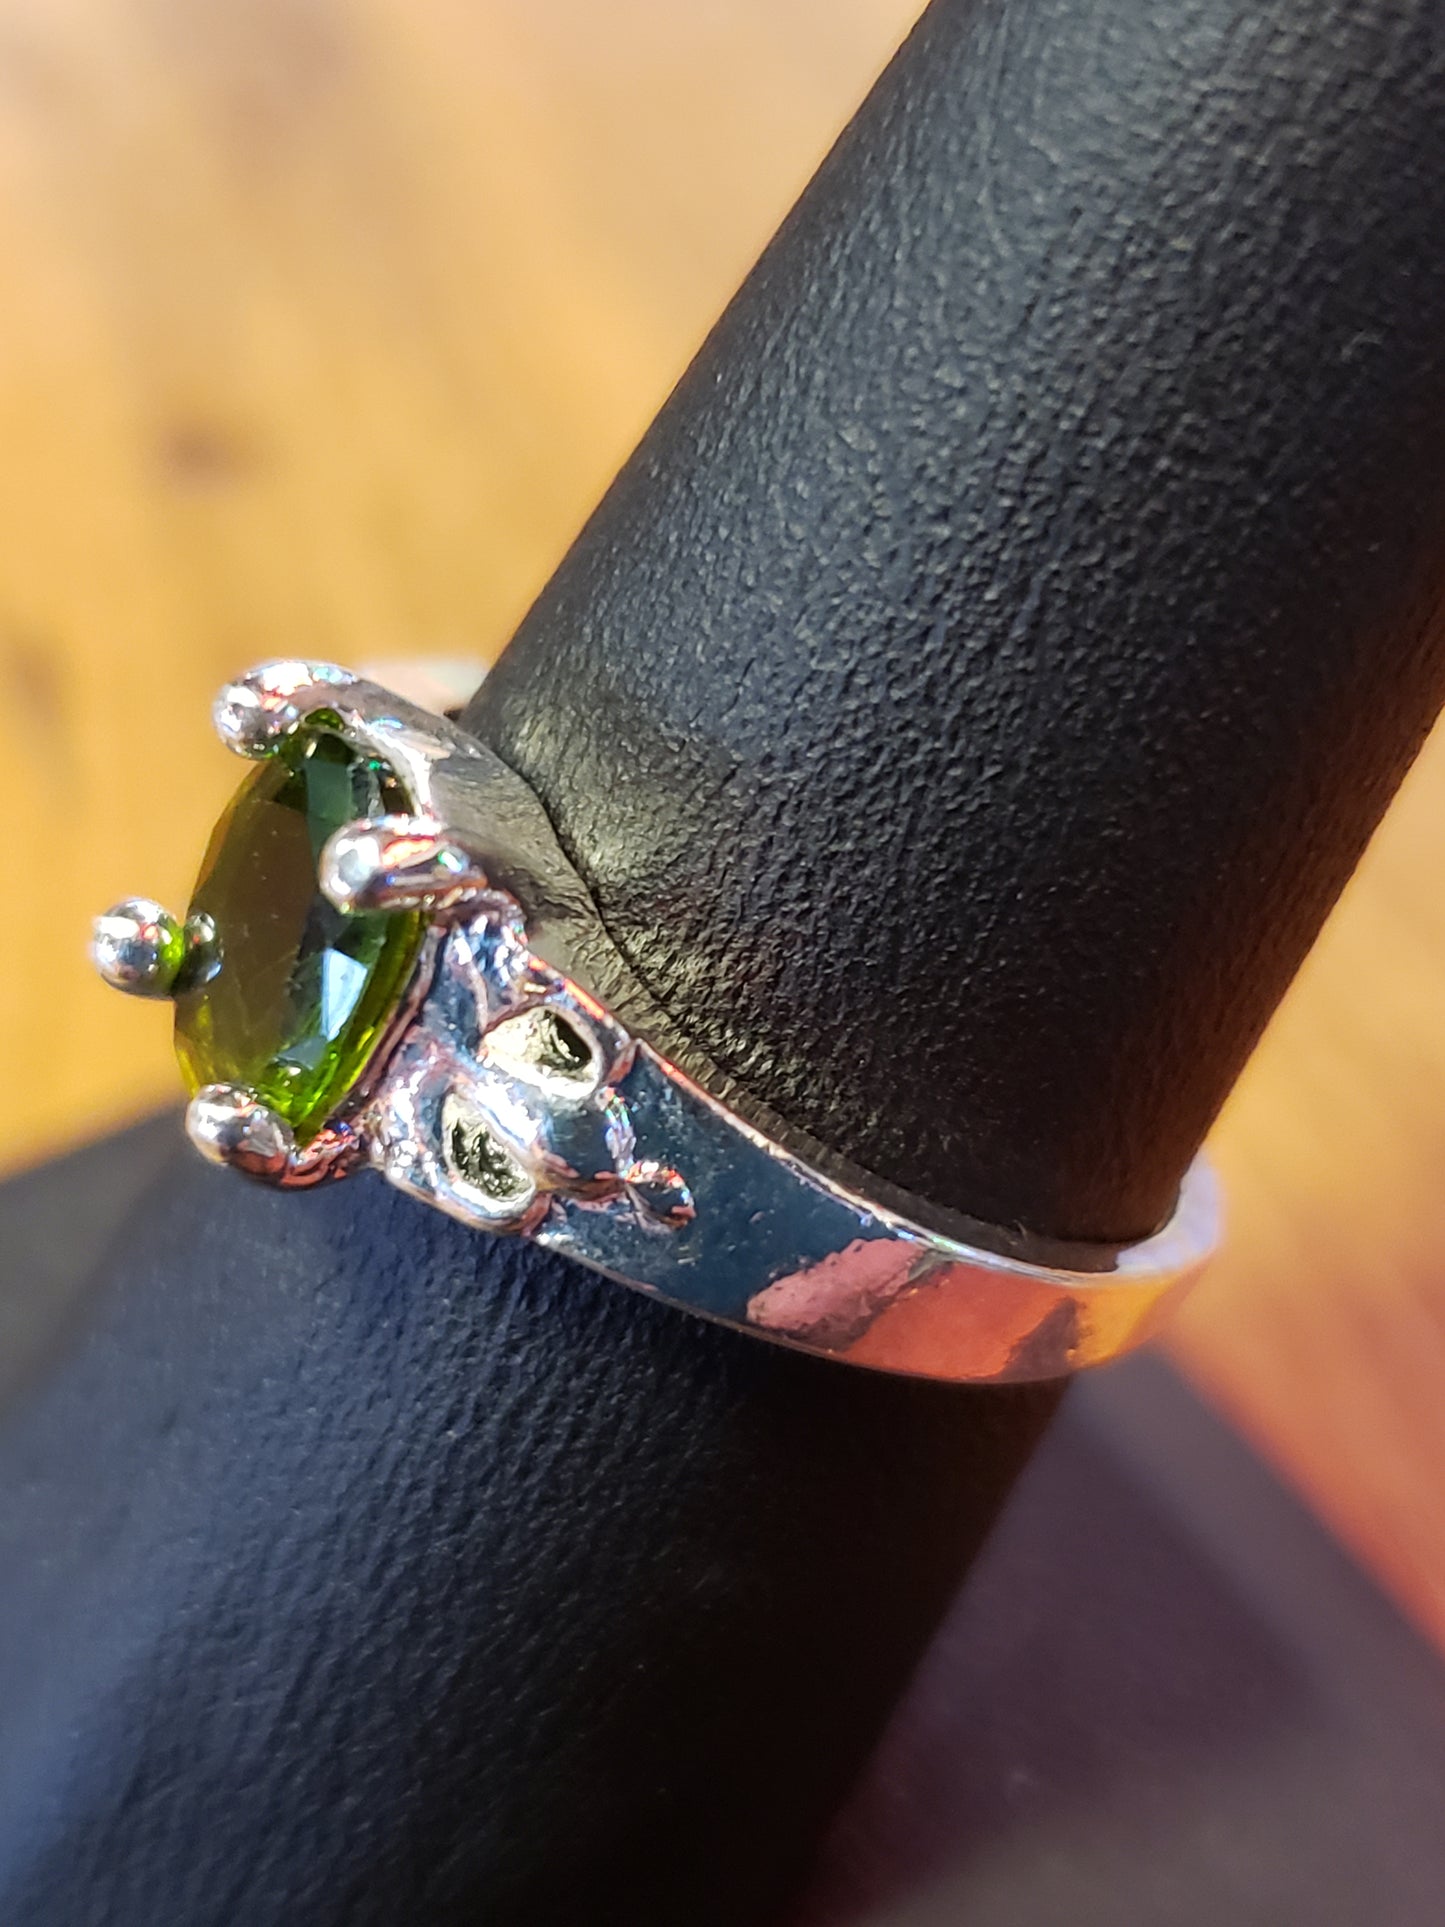 .925 ring with green stone size 7.5